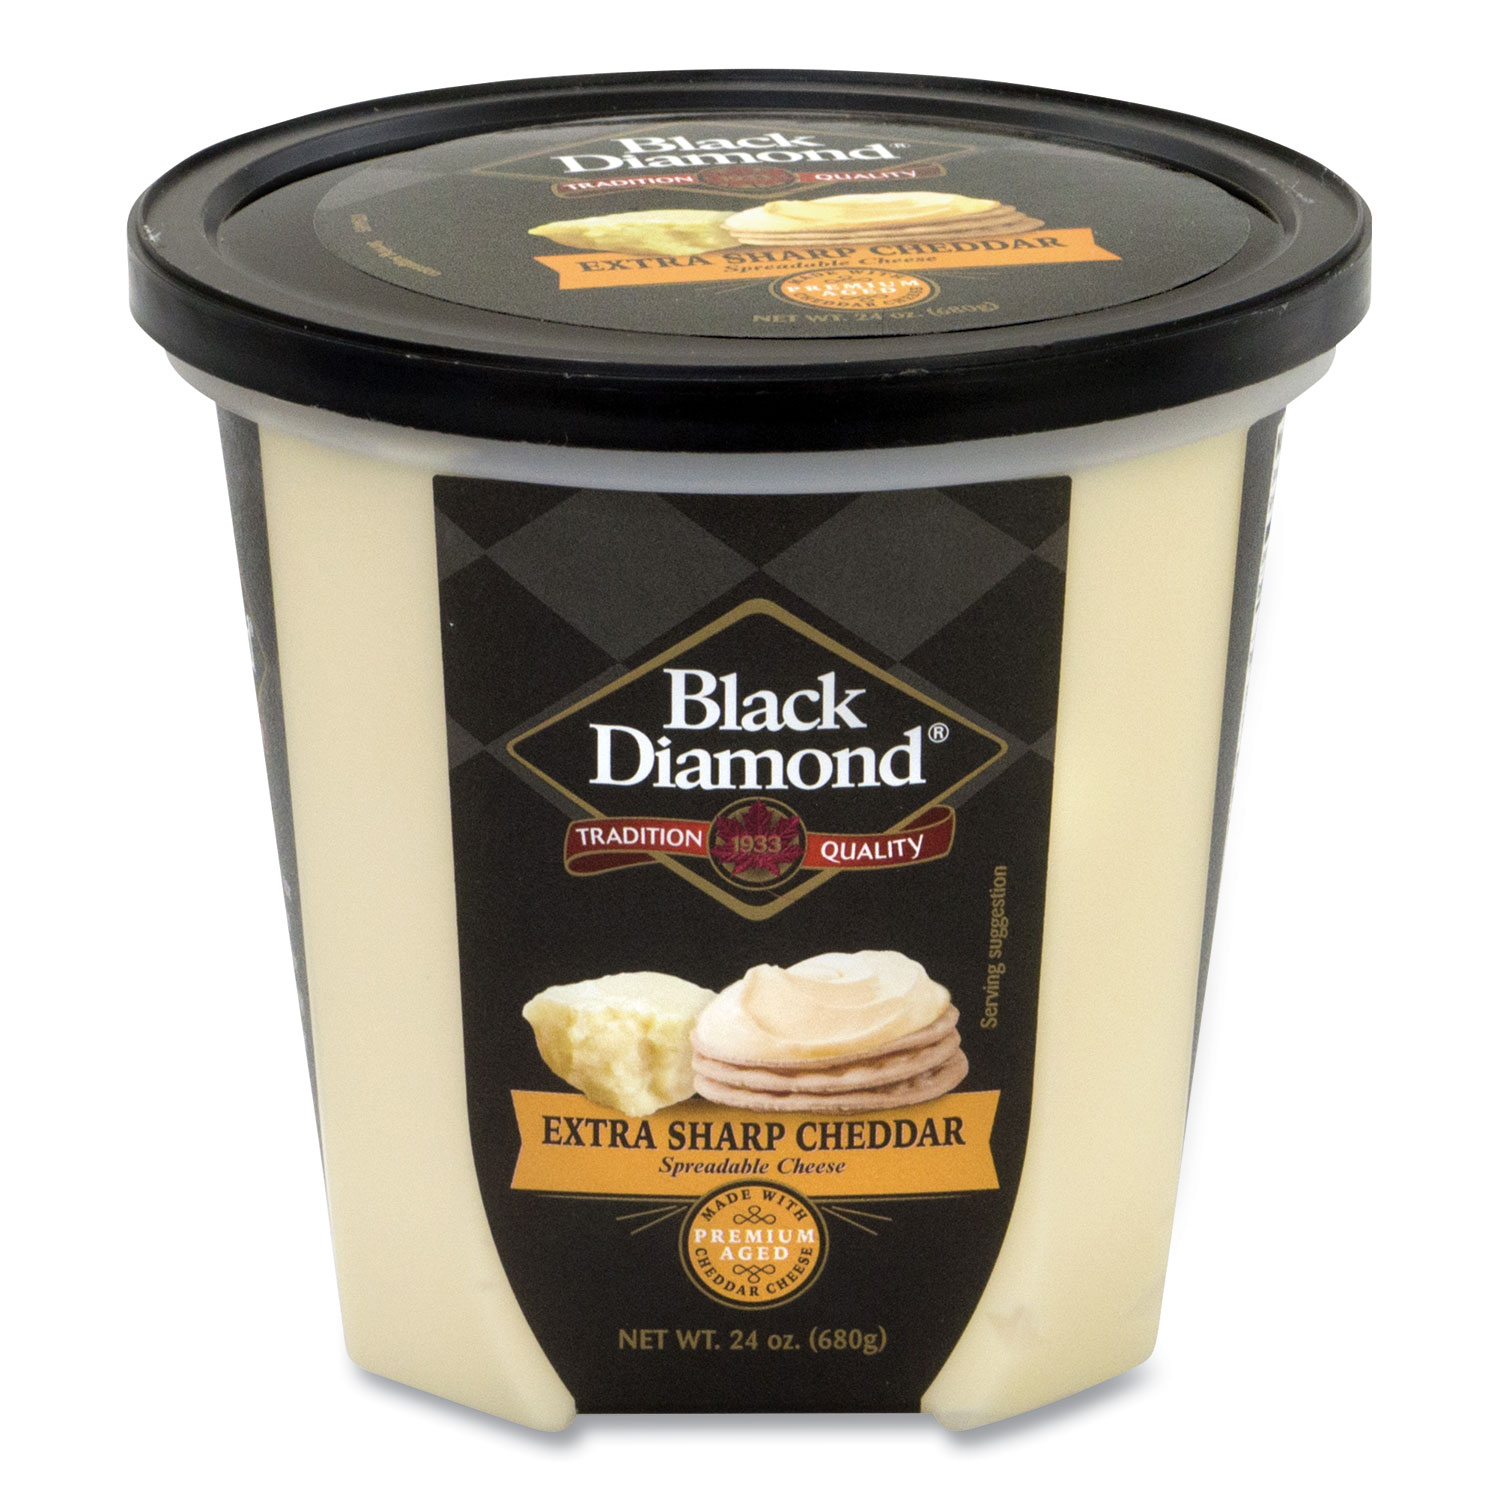 Black Diamond® Extra Sharp White Cheddar Cheese Spread, 24 oz Tub, Free Delivery in 1-4 Business Days